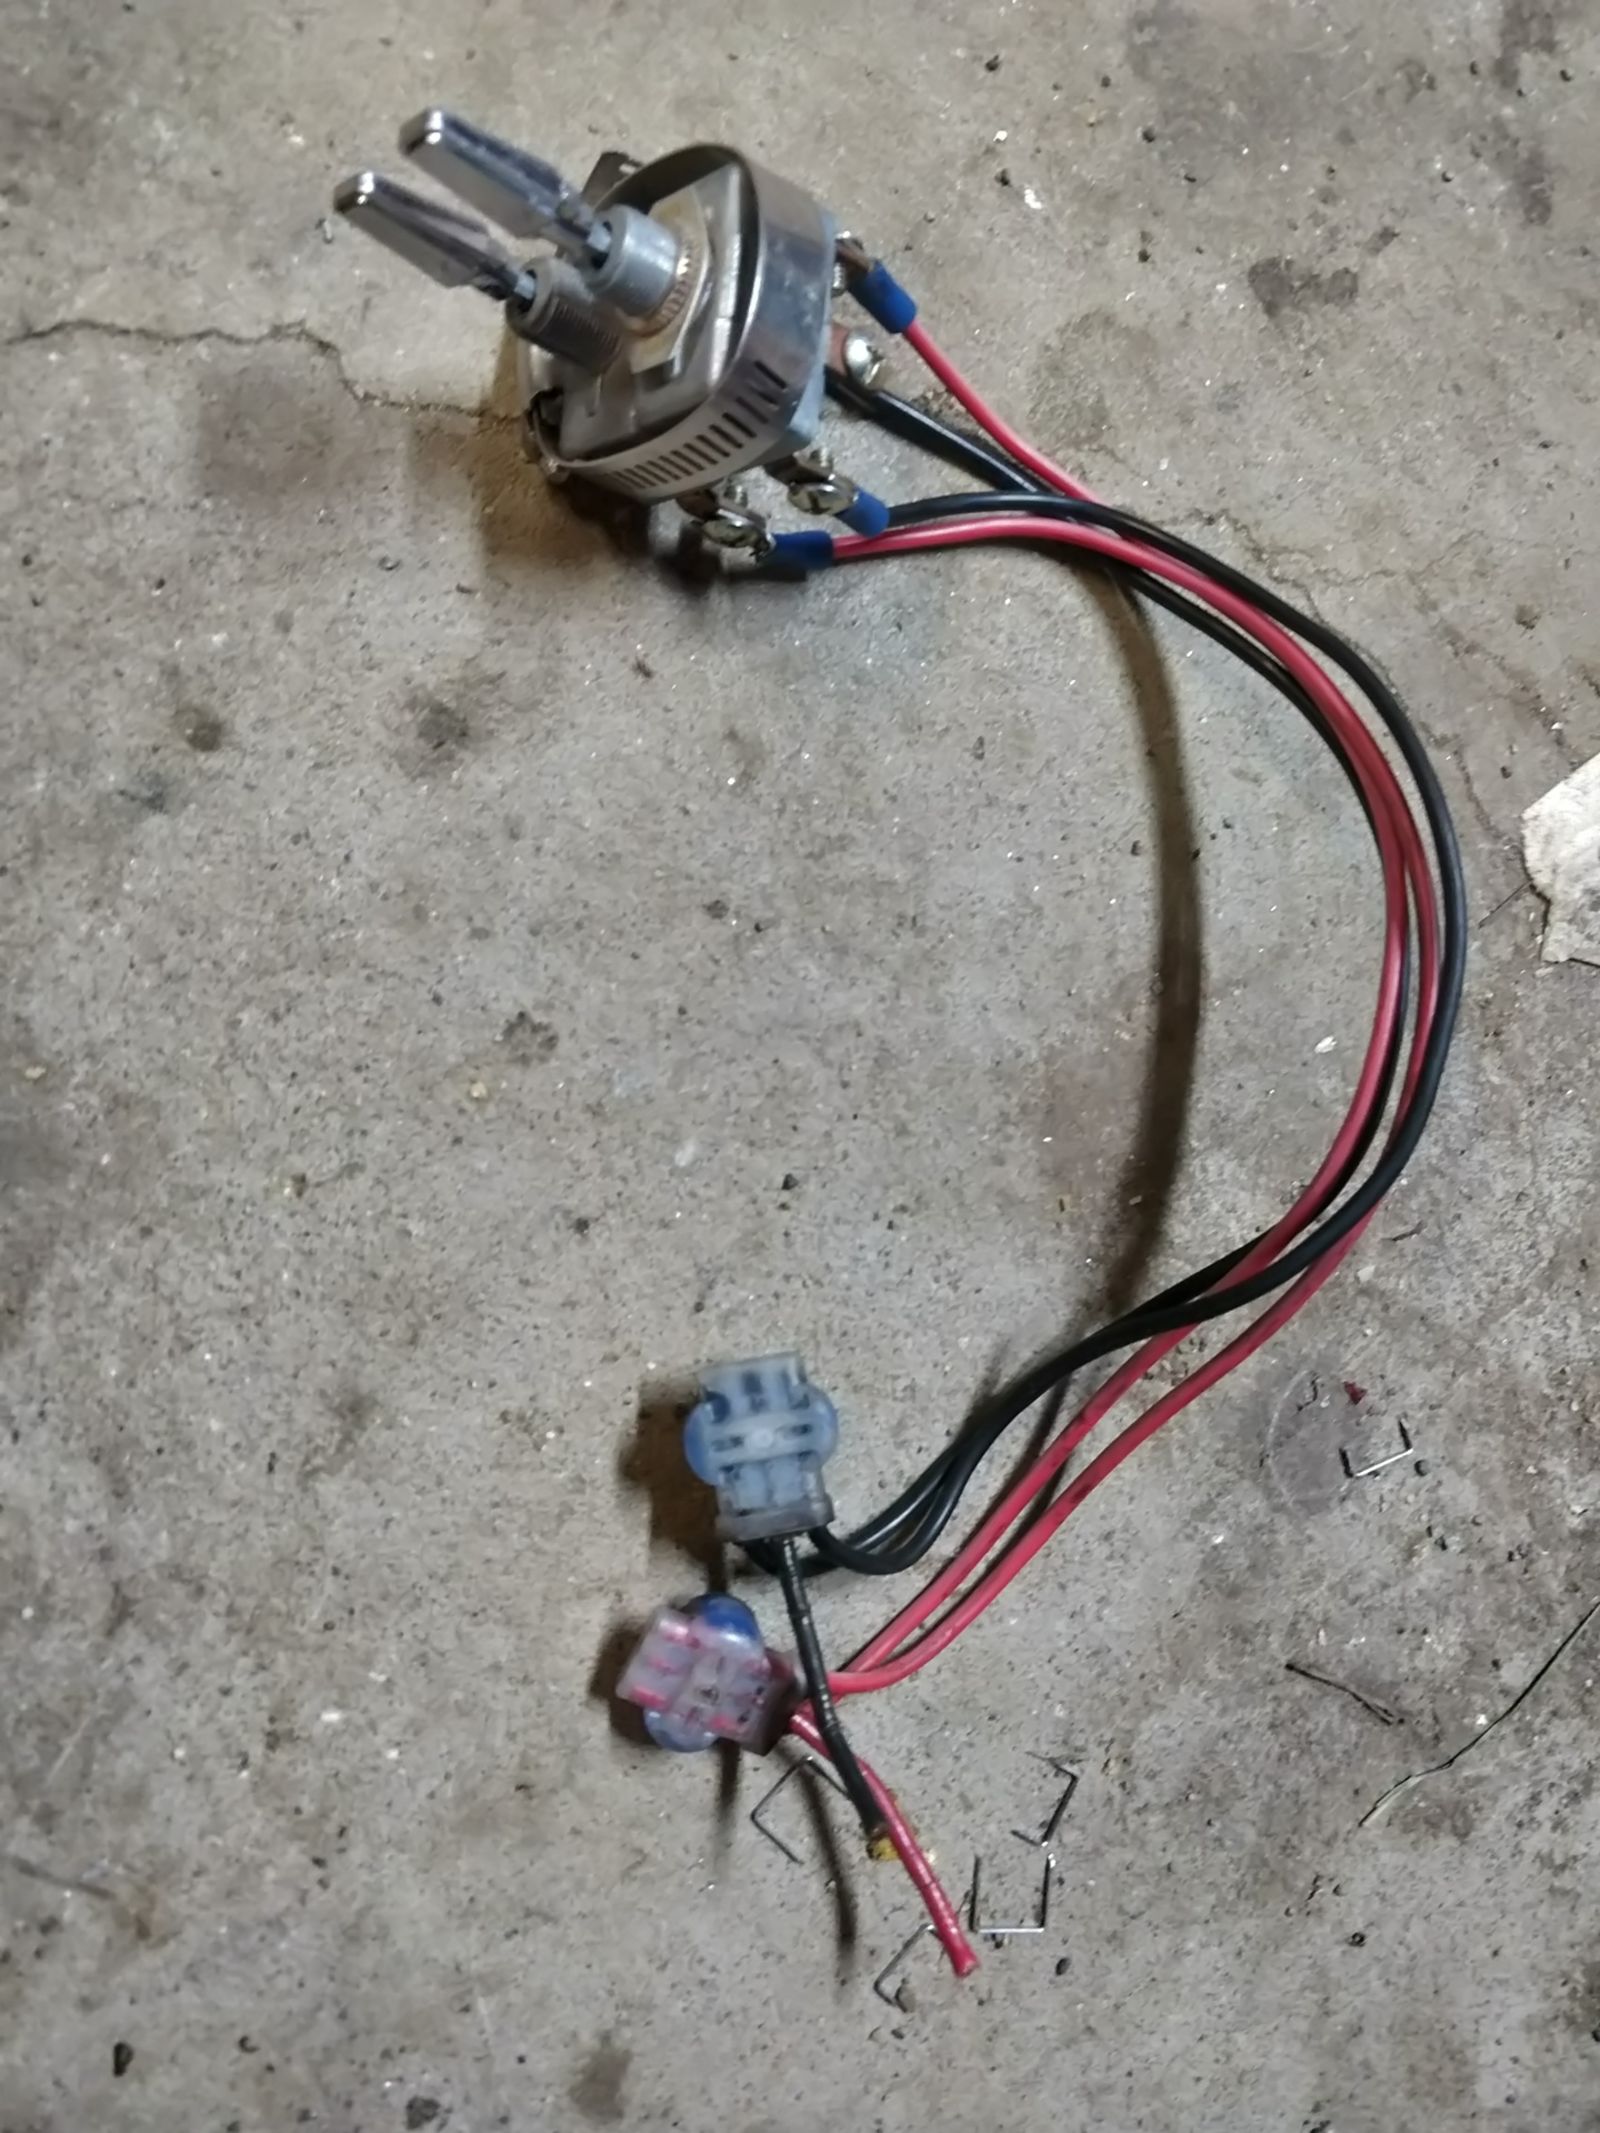 Yeah, thats 2 $10 no-name chinese switches from the autoparts store wired as a replacement for a reversing relay. This tehnically “works” but its a fire and electrical hazzard.